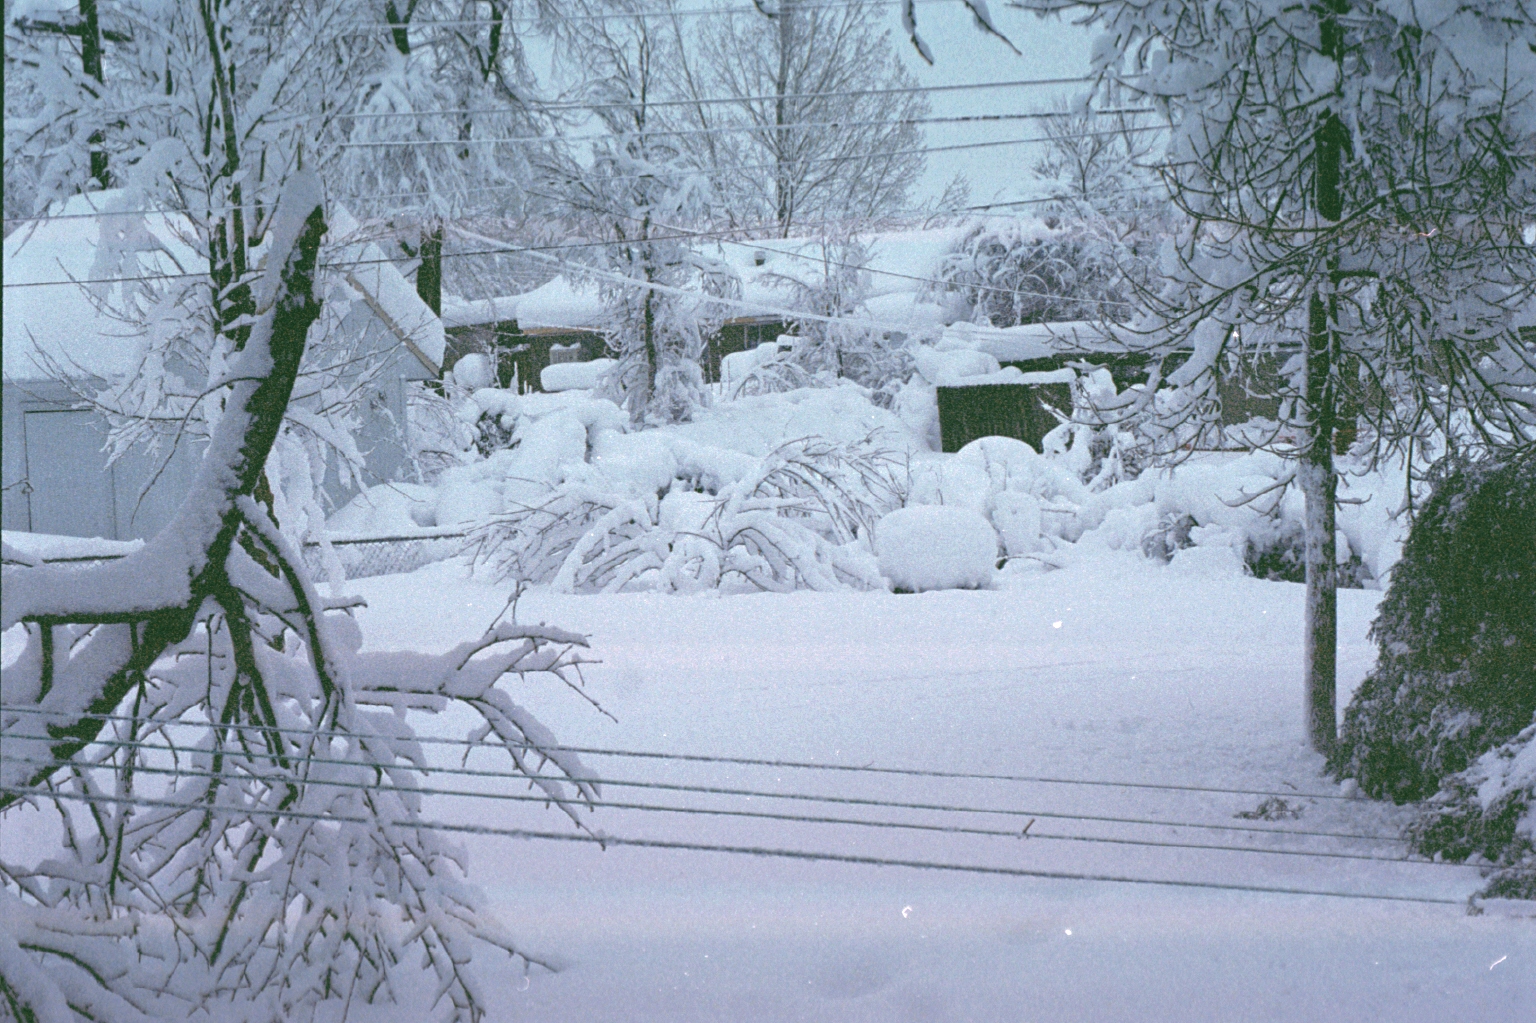 the Blizzard of 1993 storm of the century